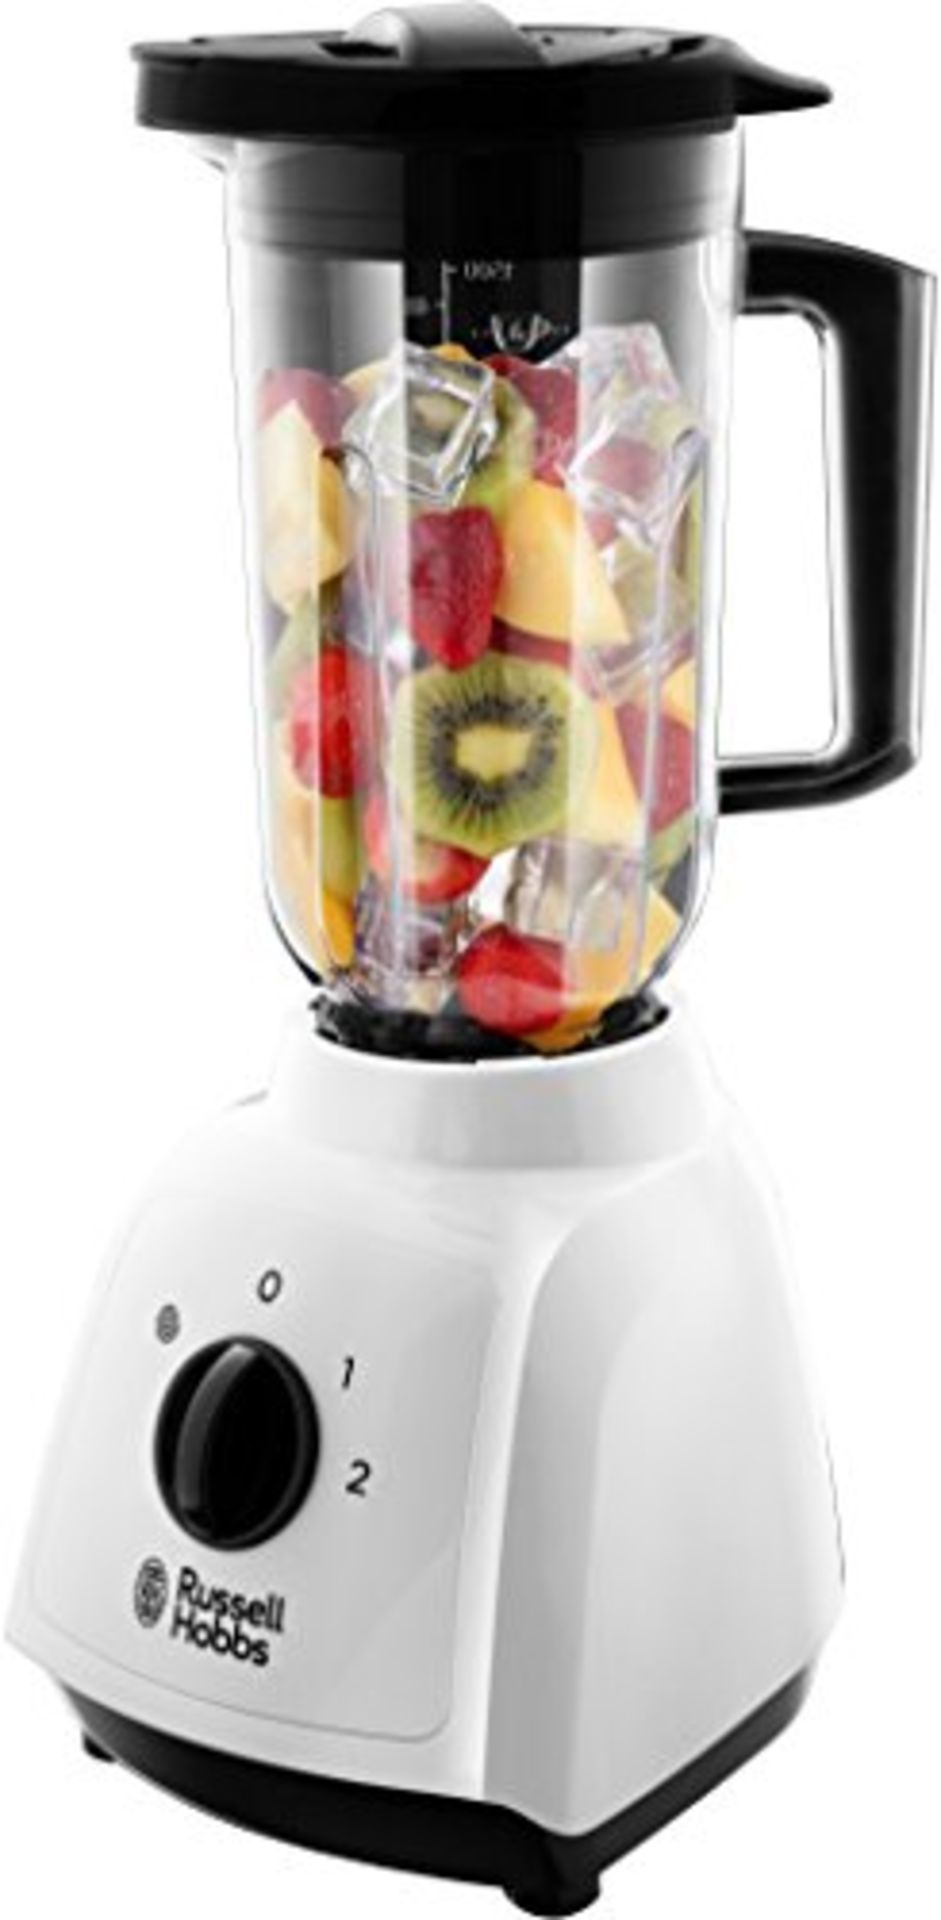 Russell Hobbs 24610 Plastic Jug Blender, 1.5 Litre Capacity and Two Speed Settings, 40